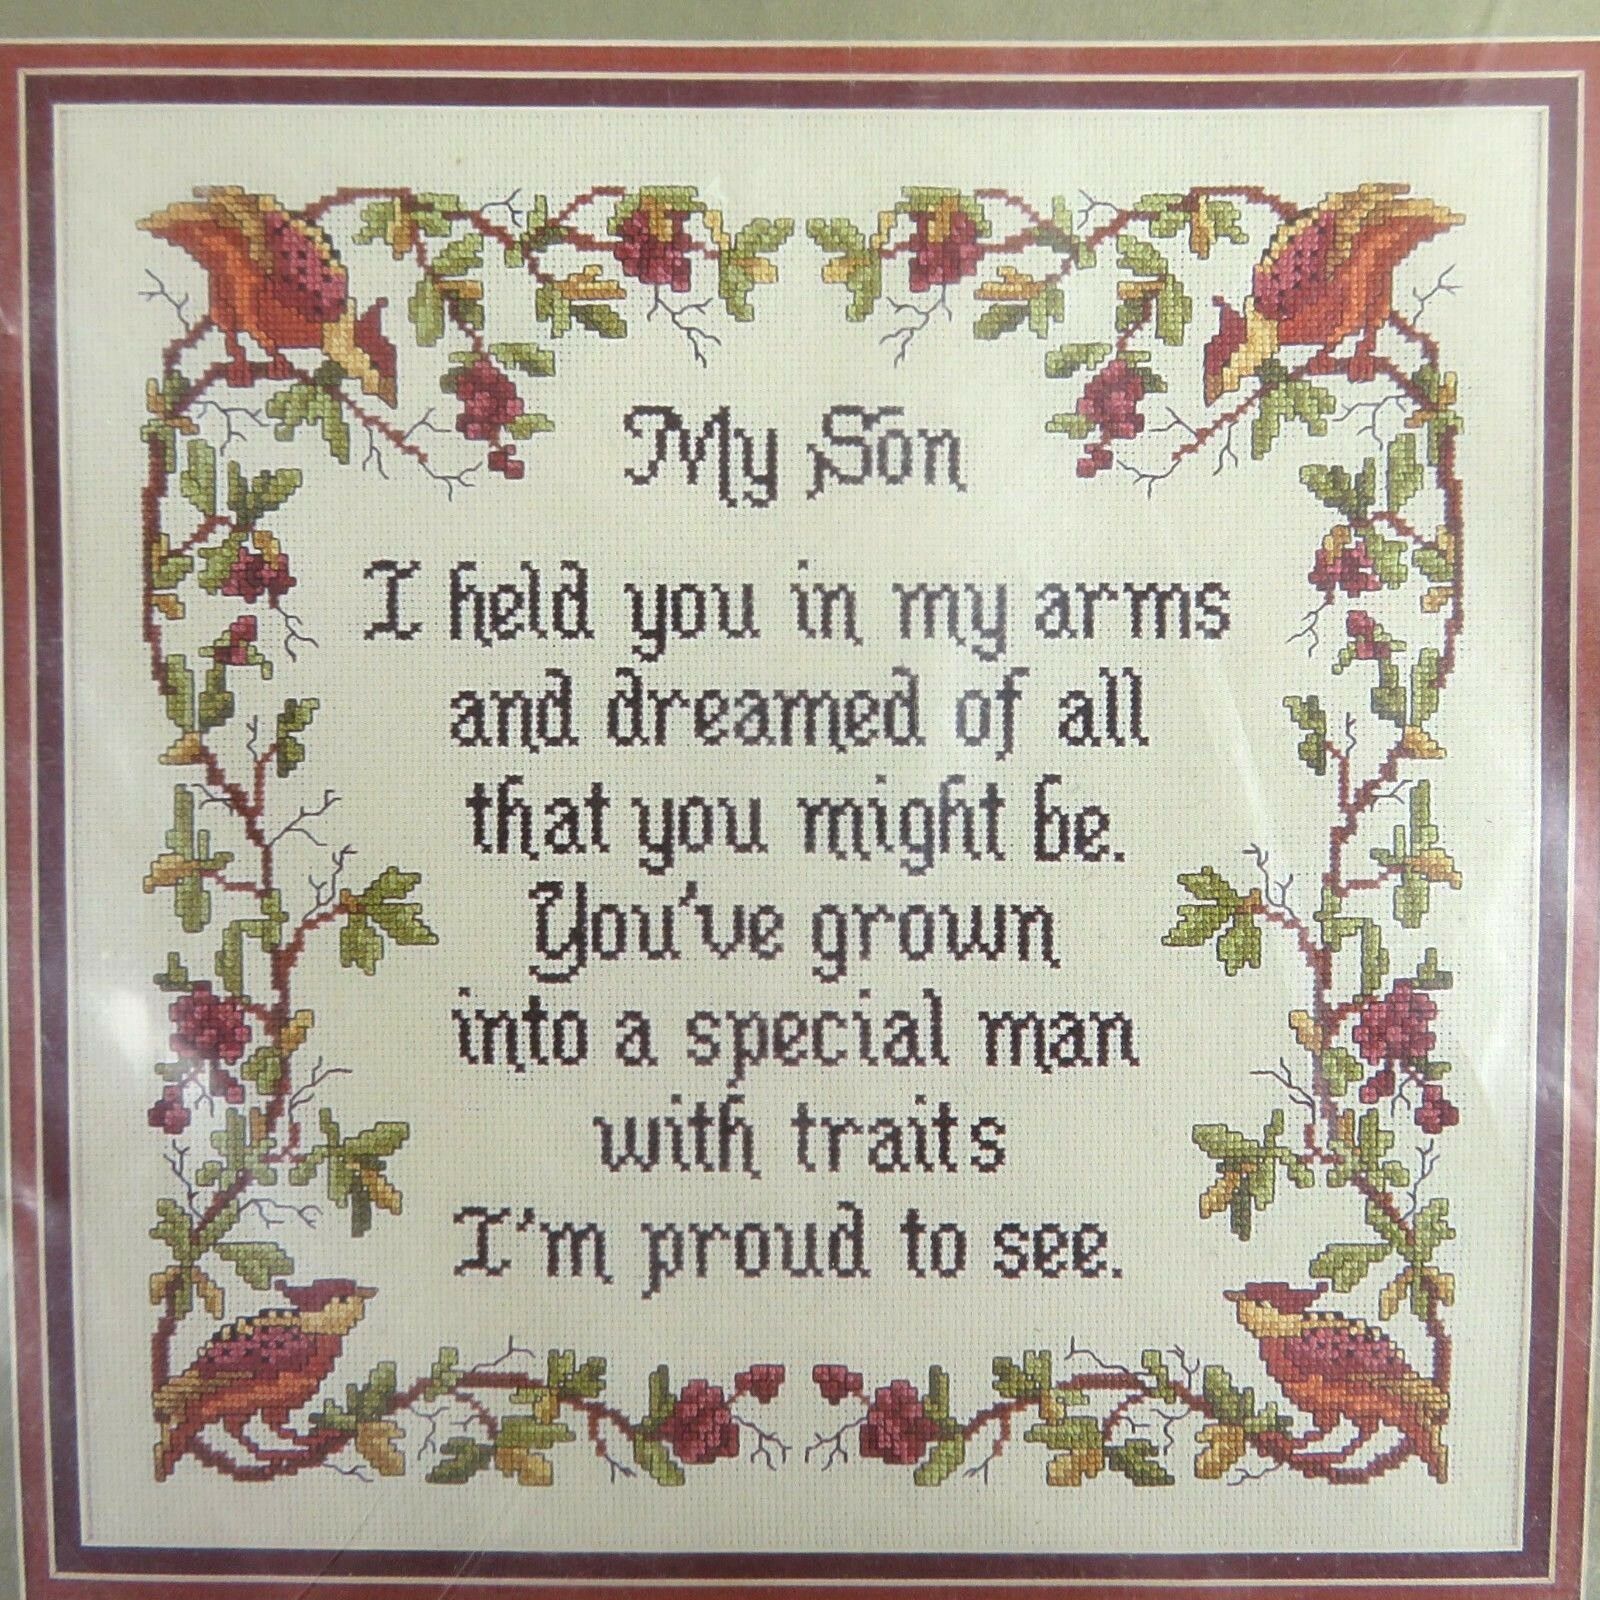 My Son Classic Cross Stitch Kit Tapestry Needlepoint Embroidery Cross My Heart - At Grandma's Table